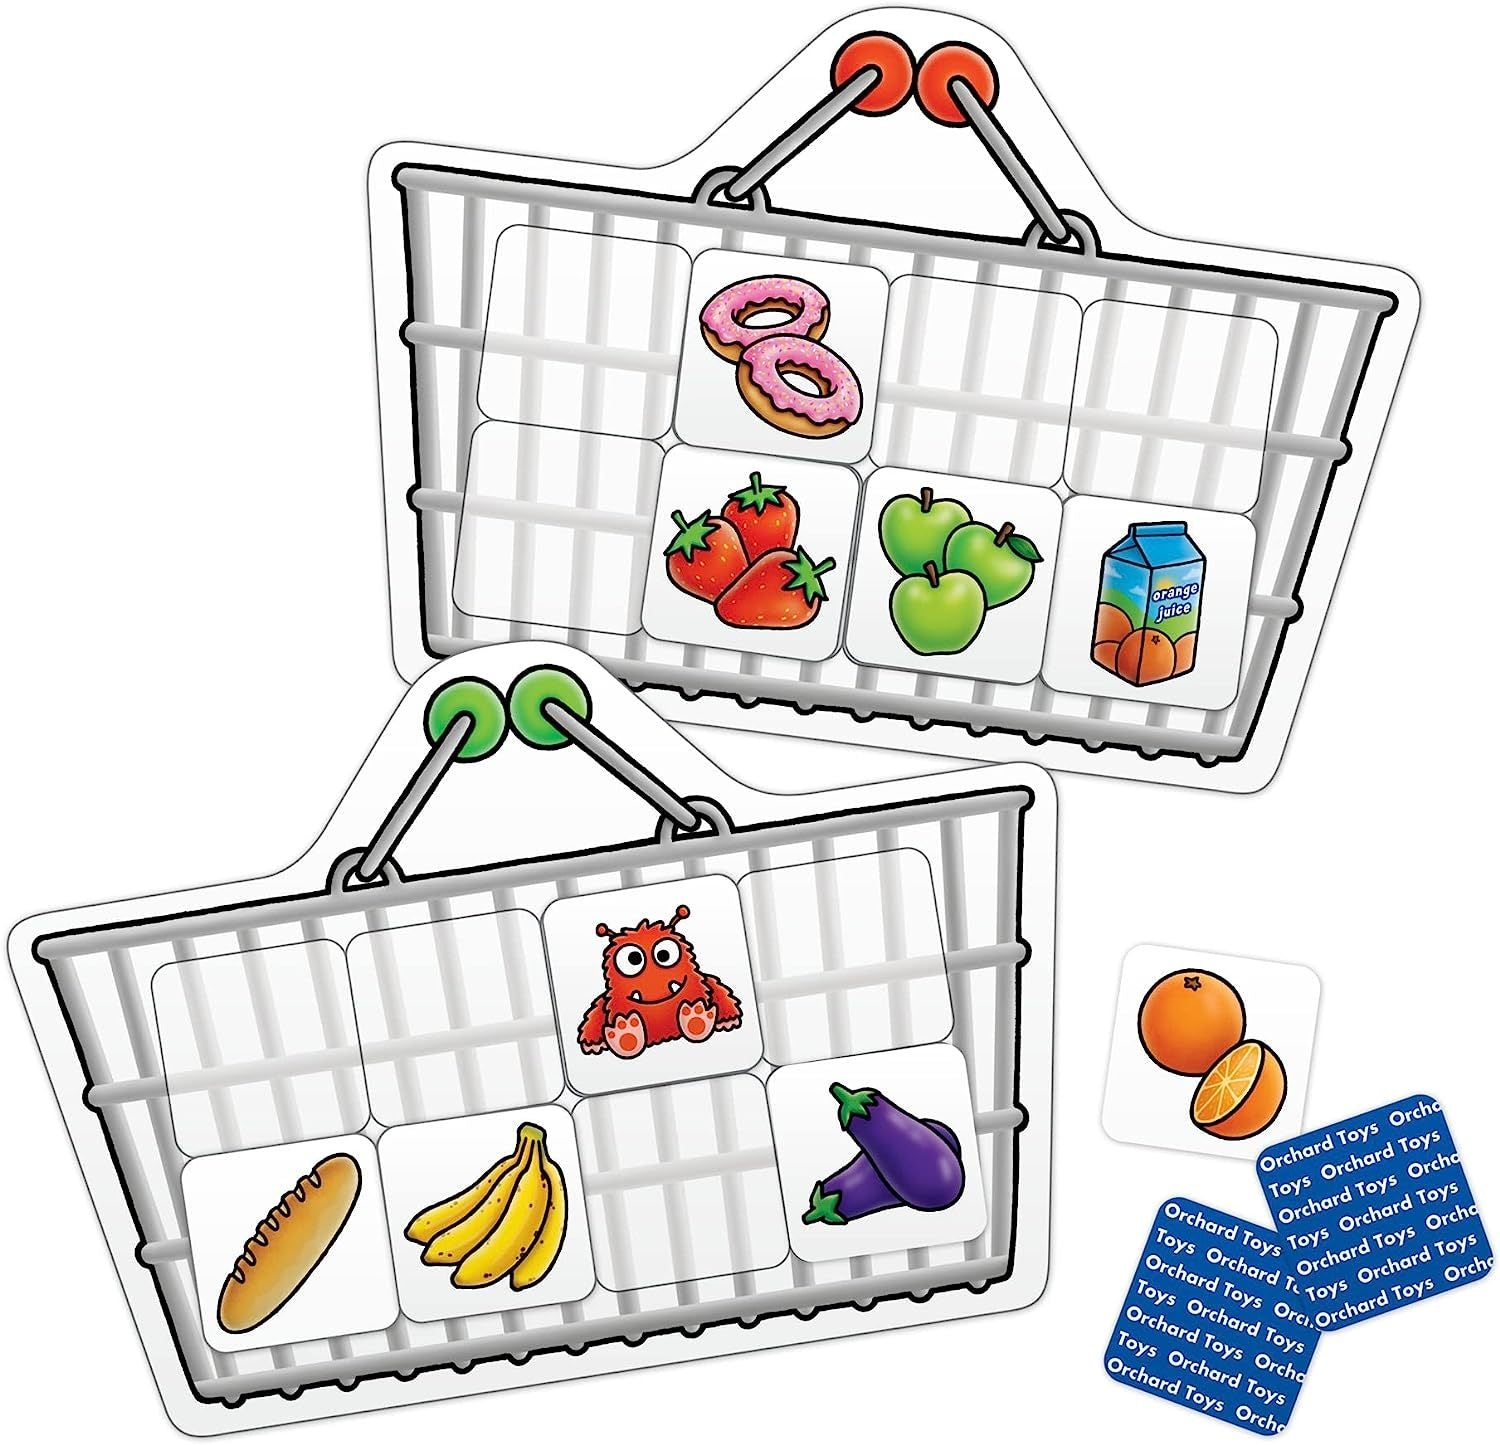 Orchard Toys: Shopping List Game